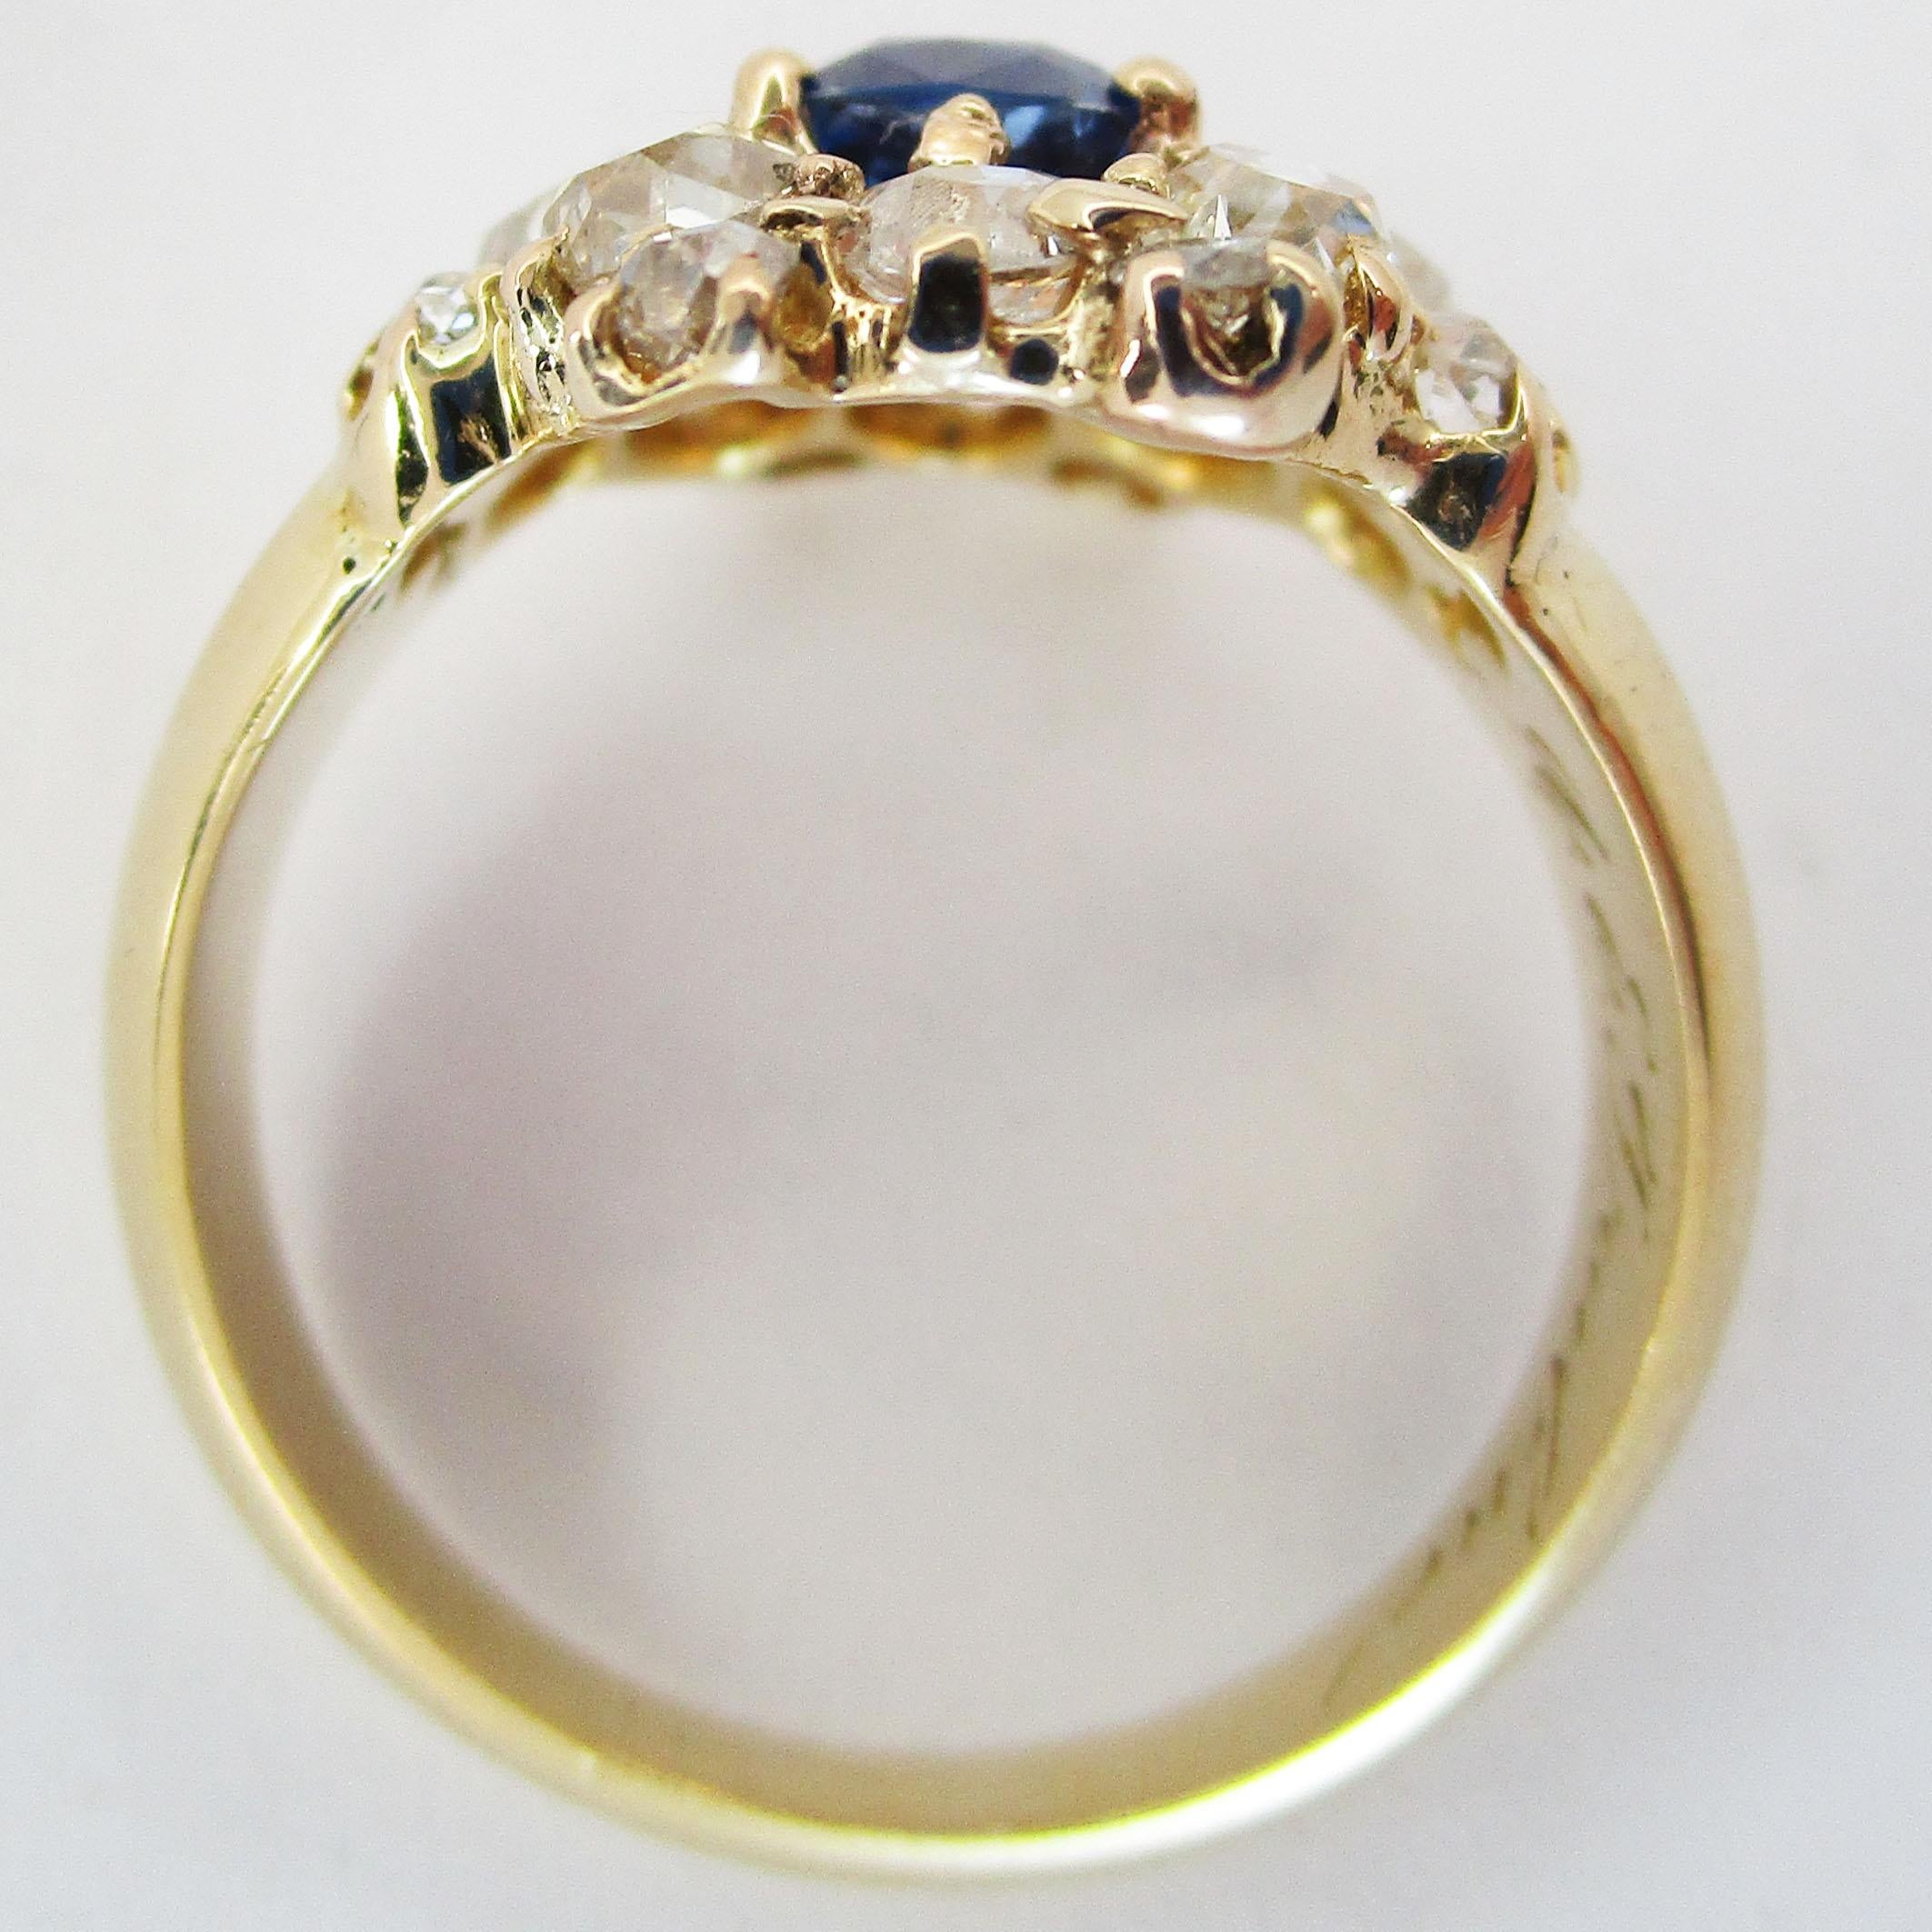 1890 Victorian 18K Yellow Gold Sapphire and Diamond Ring 1